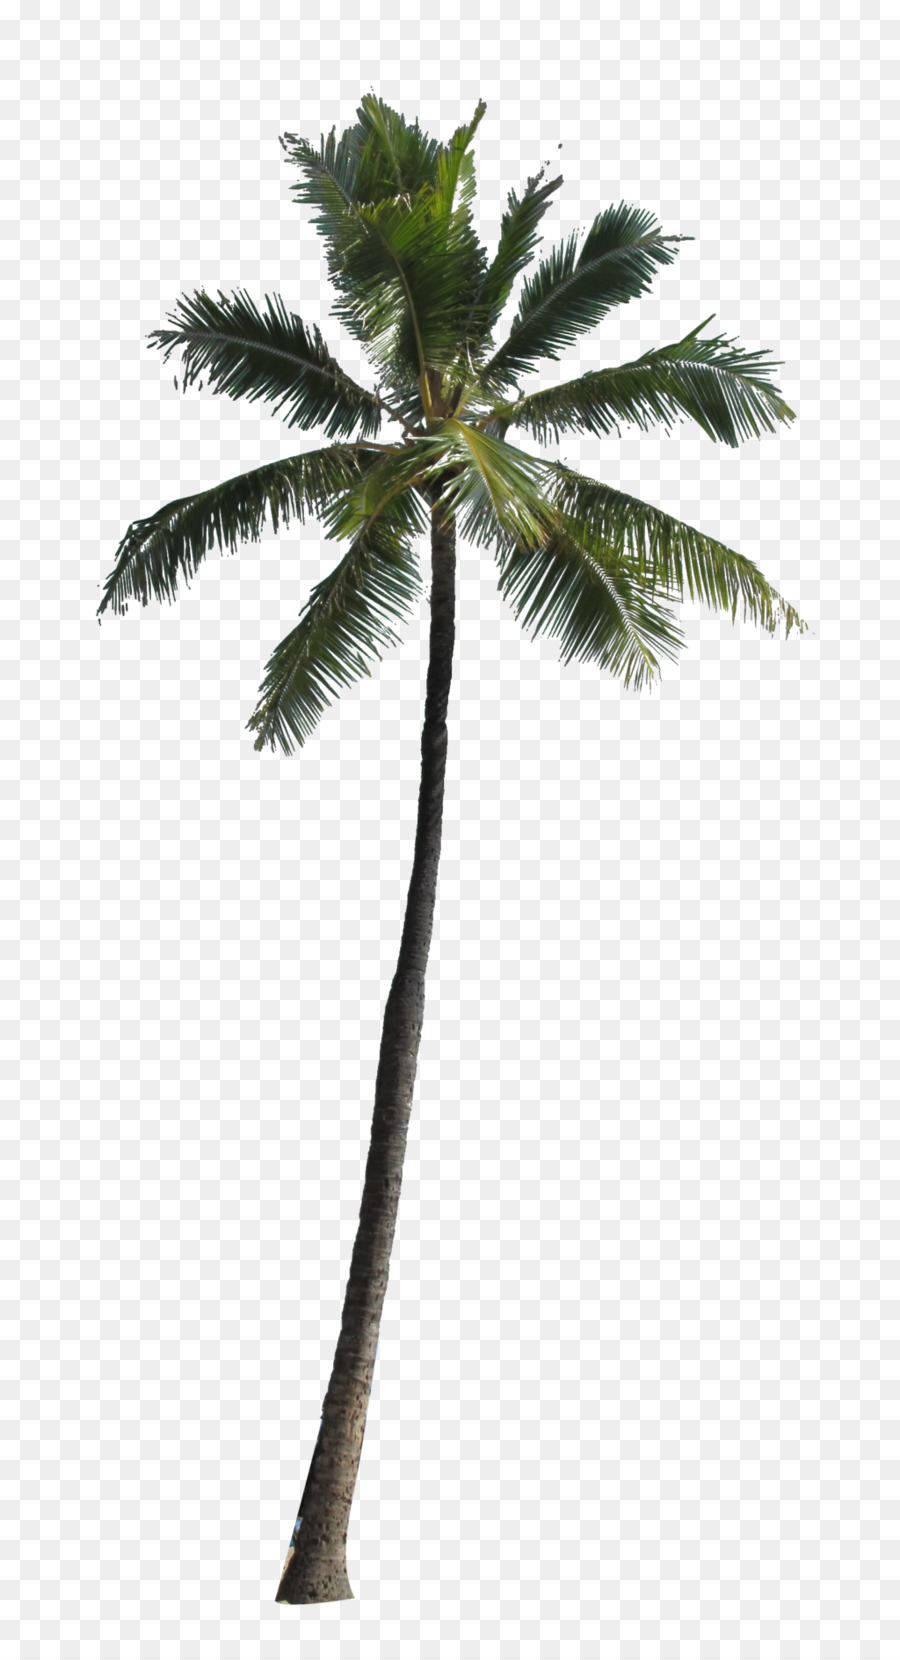 Arecaceae Tree Clip art - palm tree png download - 1024*1884 - Free Transparent Arecaceae png Download.